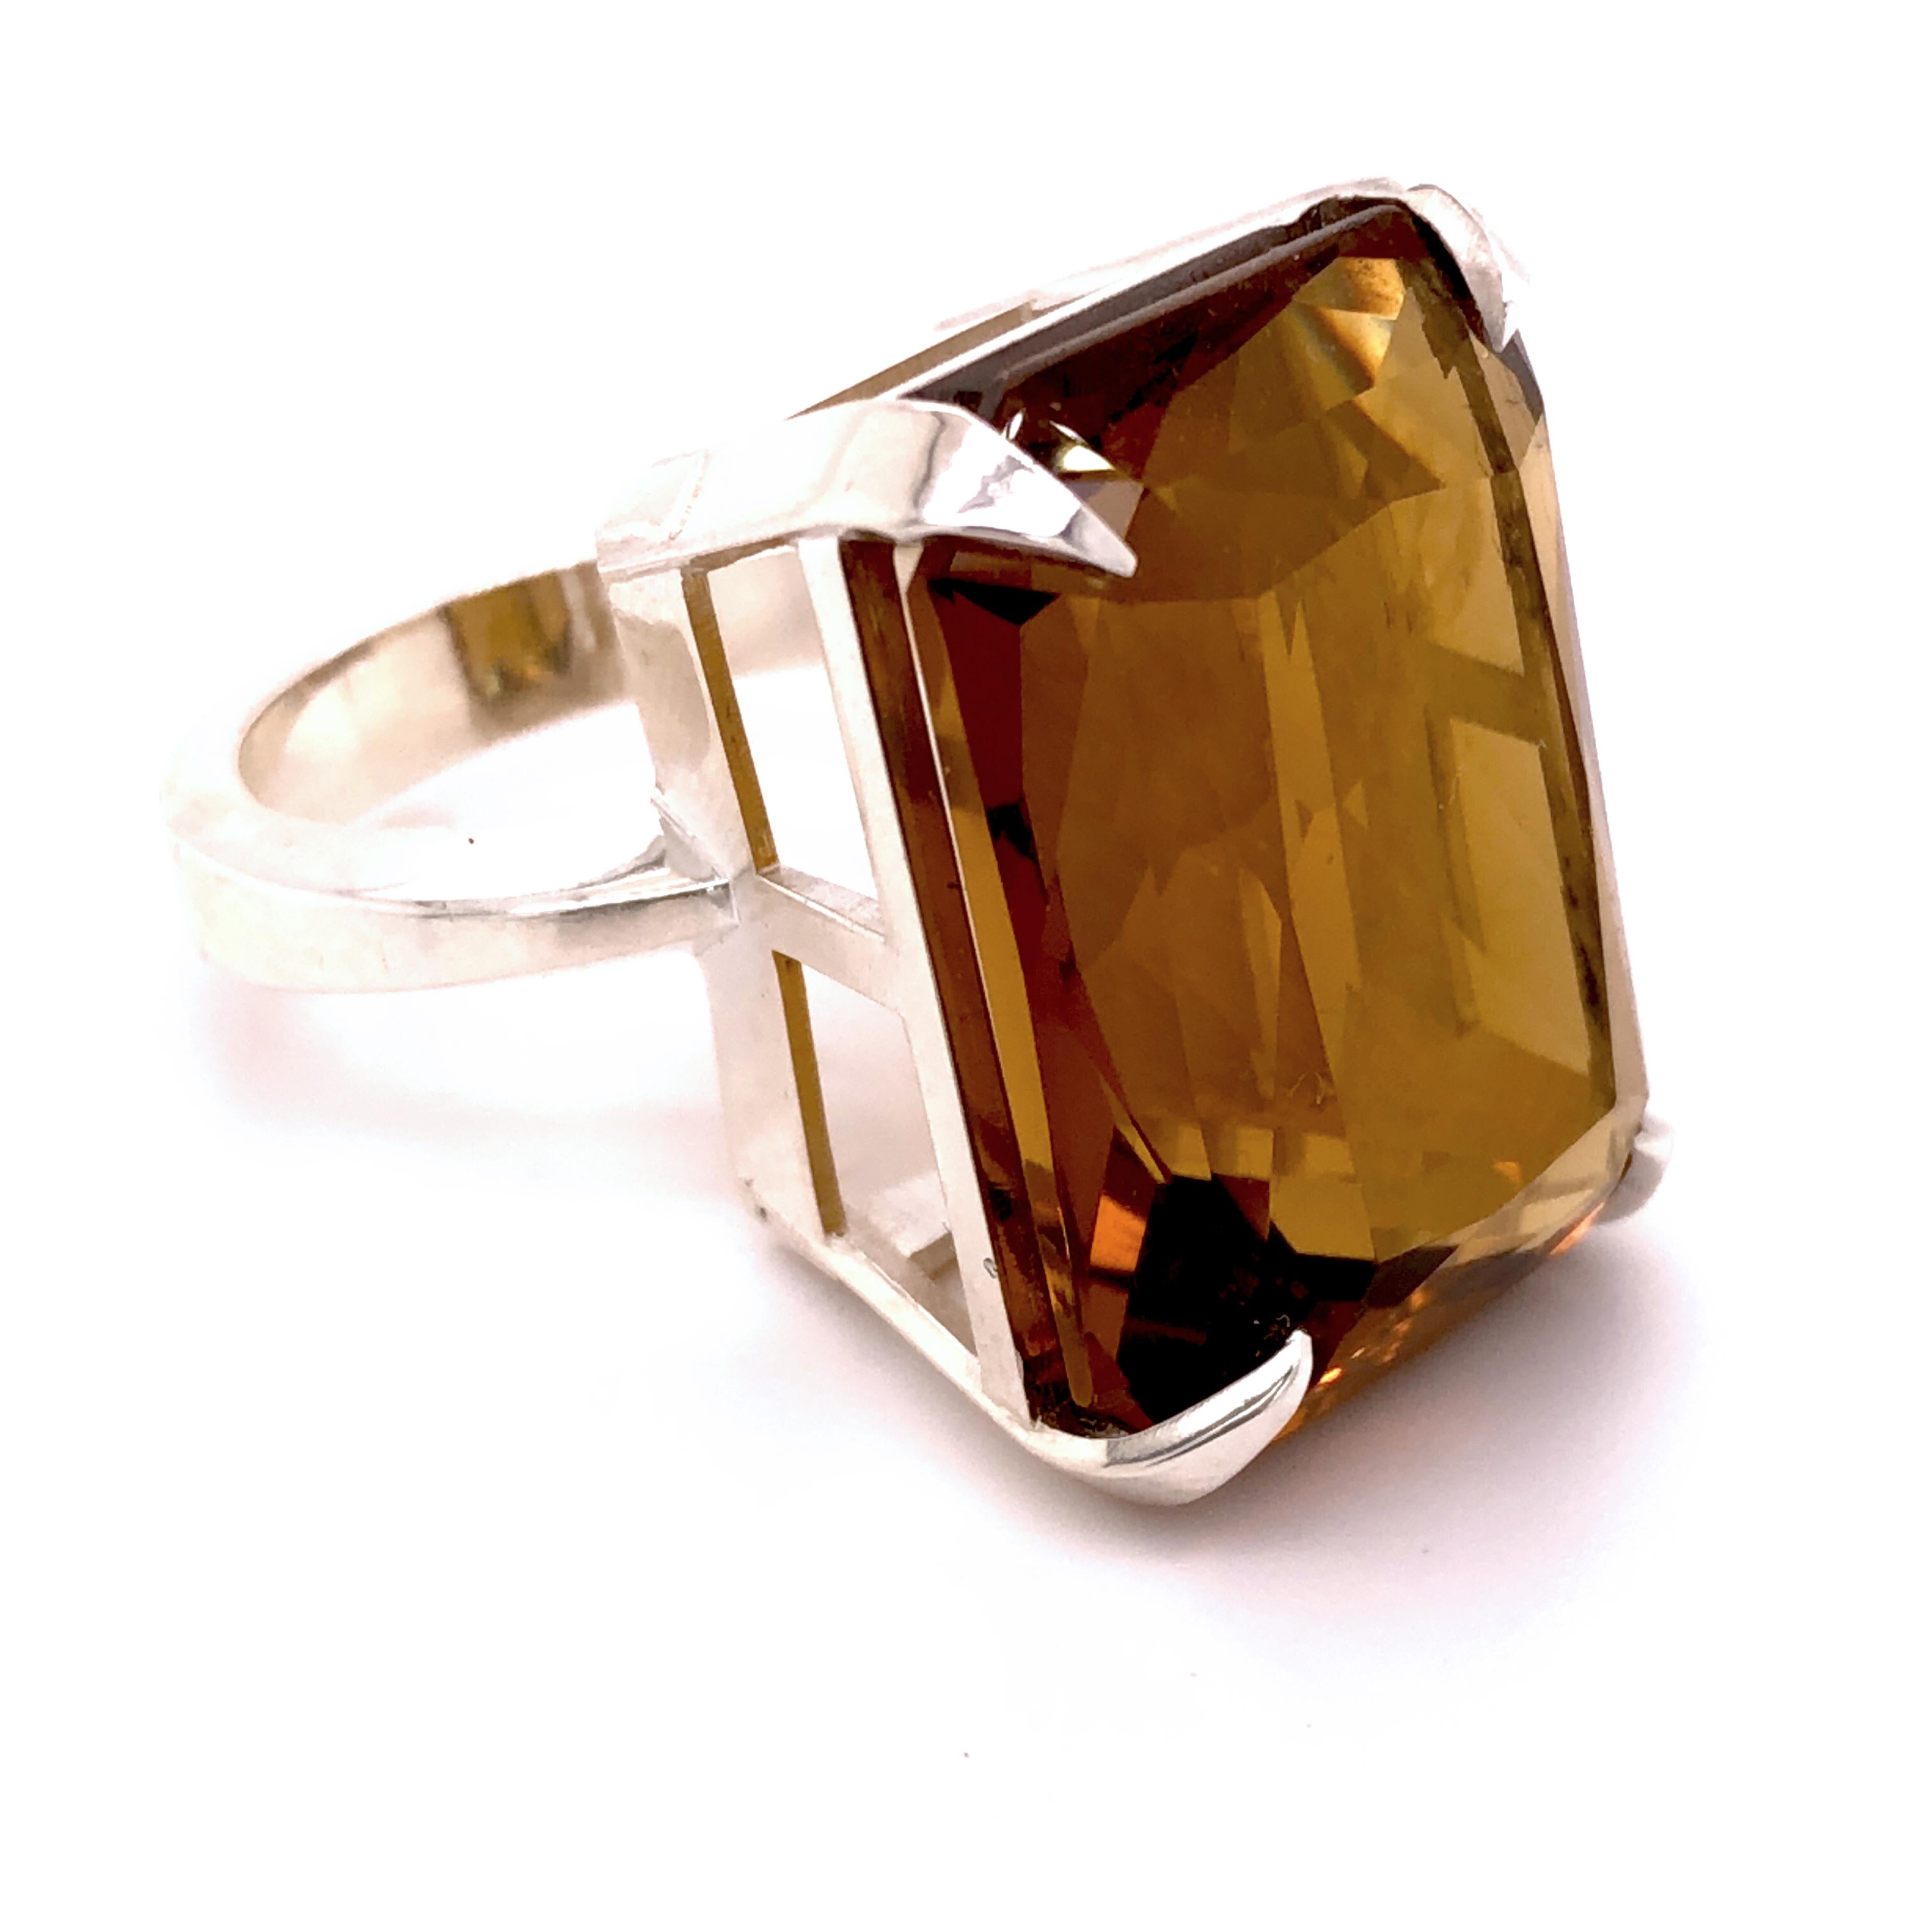 One-of-a-kind 26.78 Carat Emerald Cut Natural Smoky Quartz(0.90inches lenght 0.677inches width, 23x17.2mm) in a Chic yet Timeless mirror Finish Sterling Silver Cocktail Setting.
We are proud to offer this awesome piece perfect as Engagement Ring as